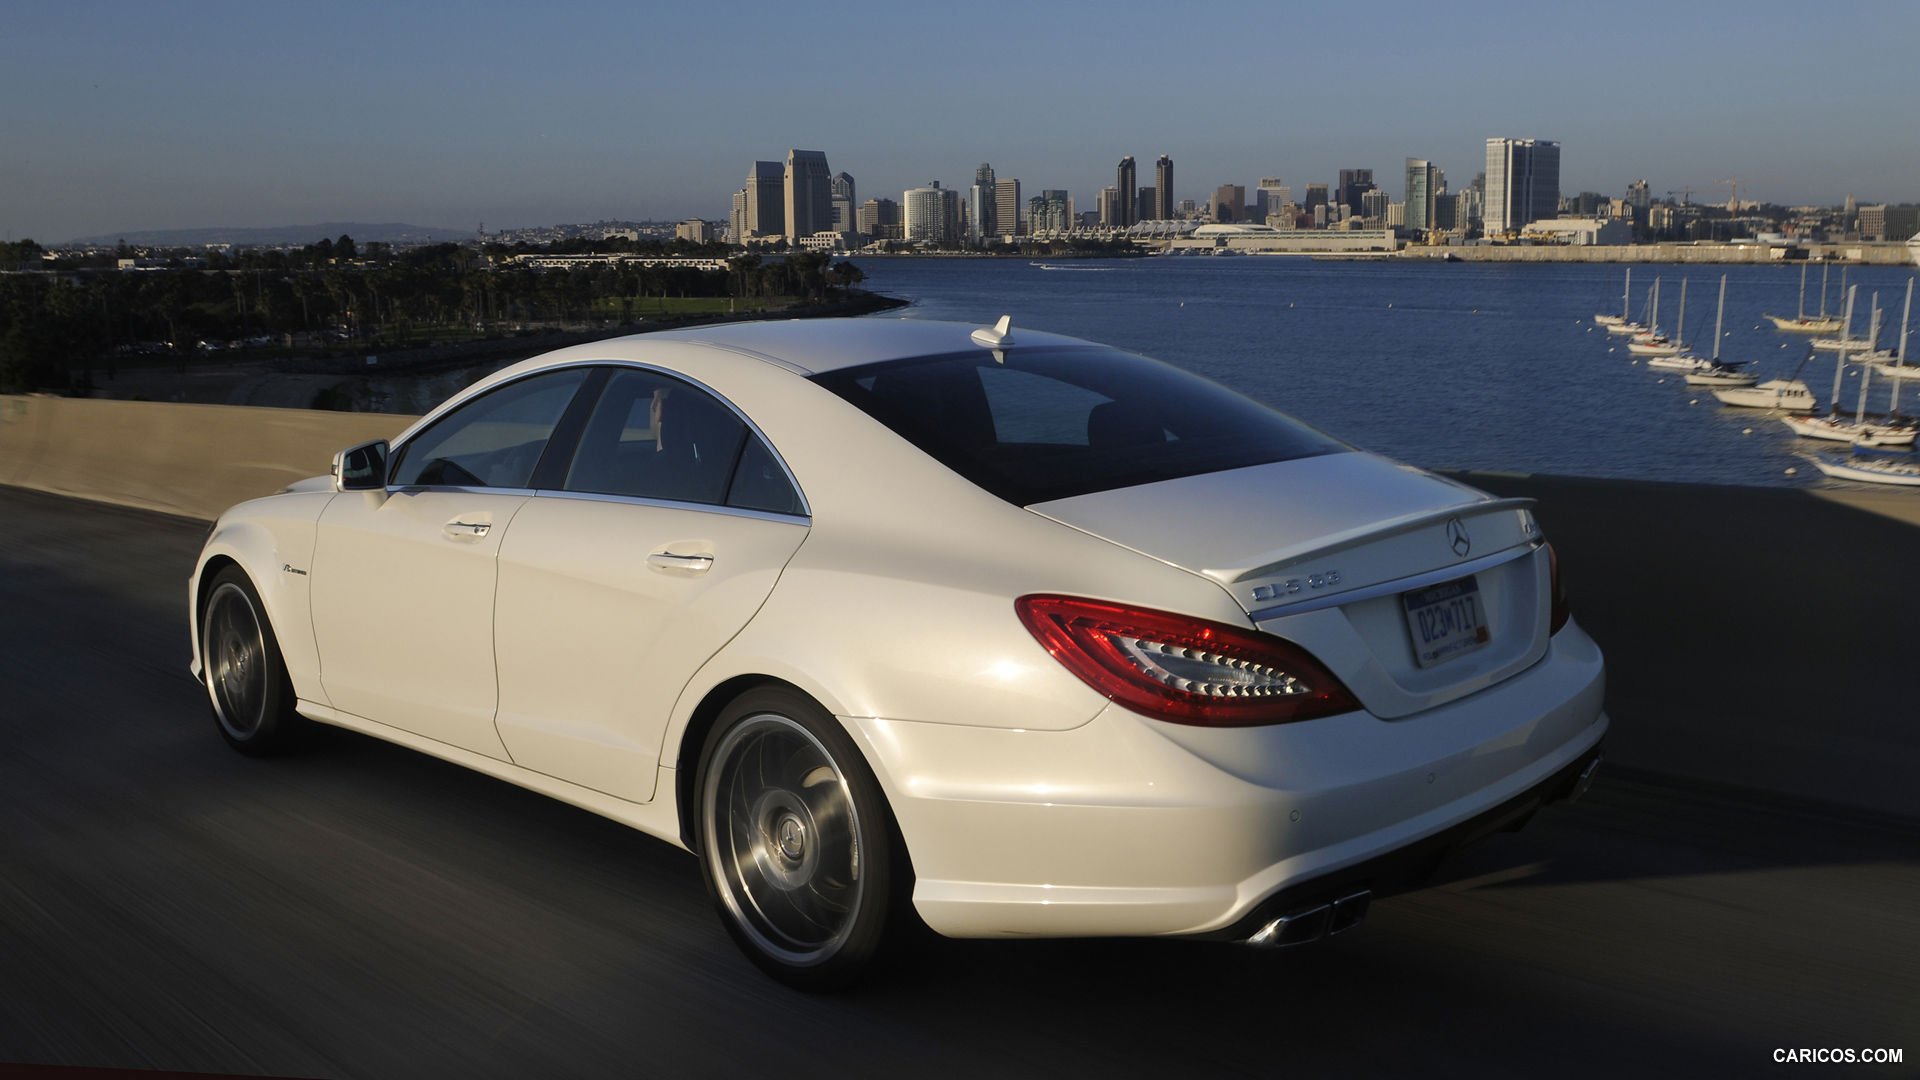 Mercedes-Benz CLS63 AMG (2012) US-Version - Diamond White - Rear , #11 of 100